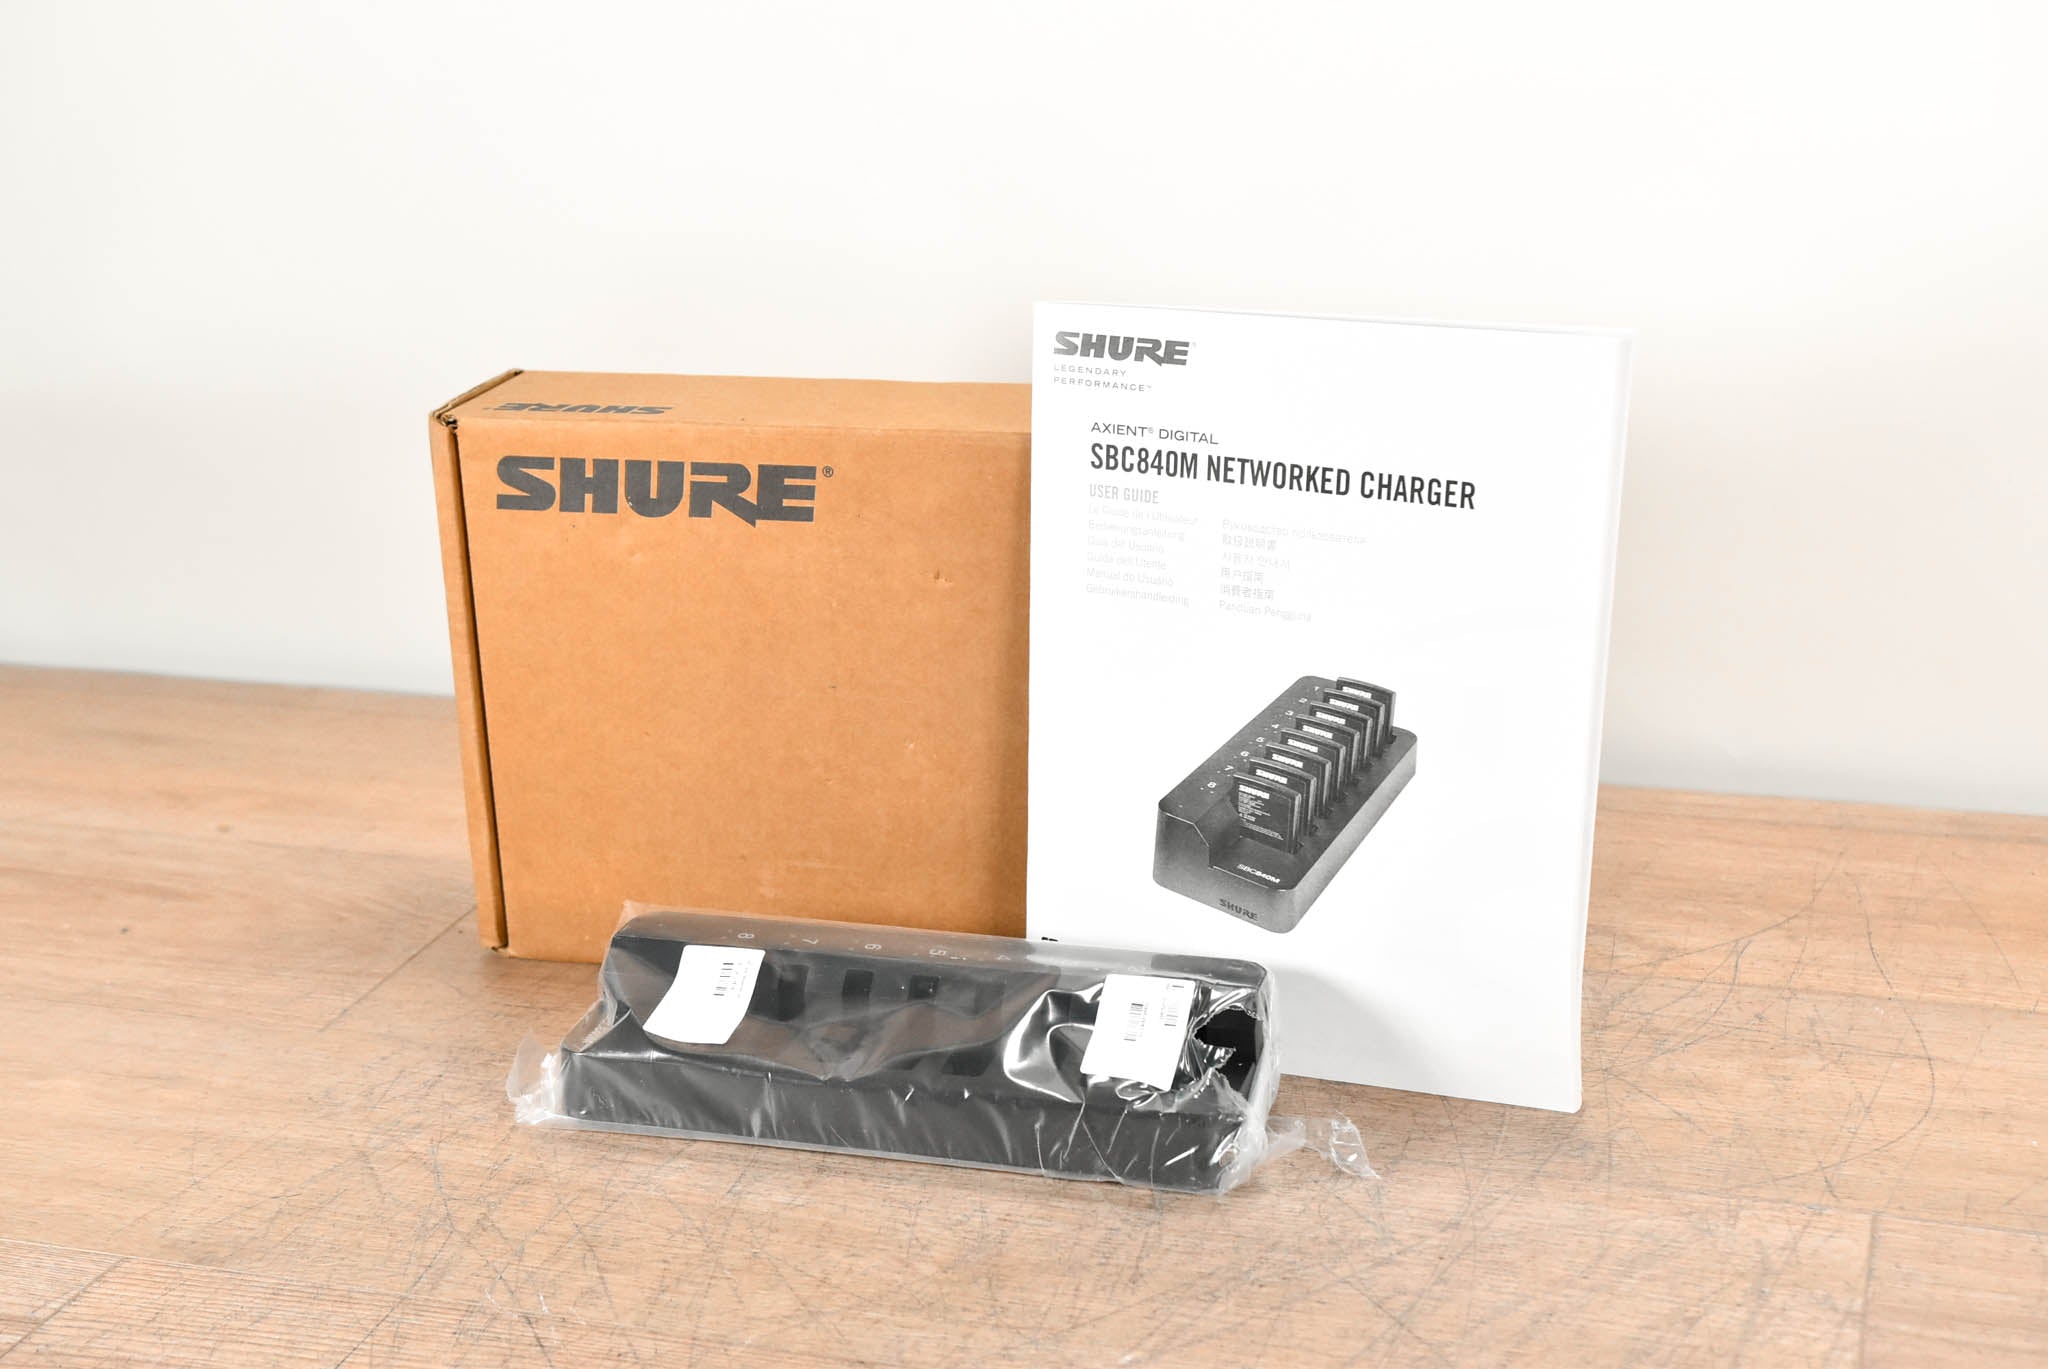 Shure SBC840M Eight-Bay Networked Charger for SB910M Batteries